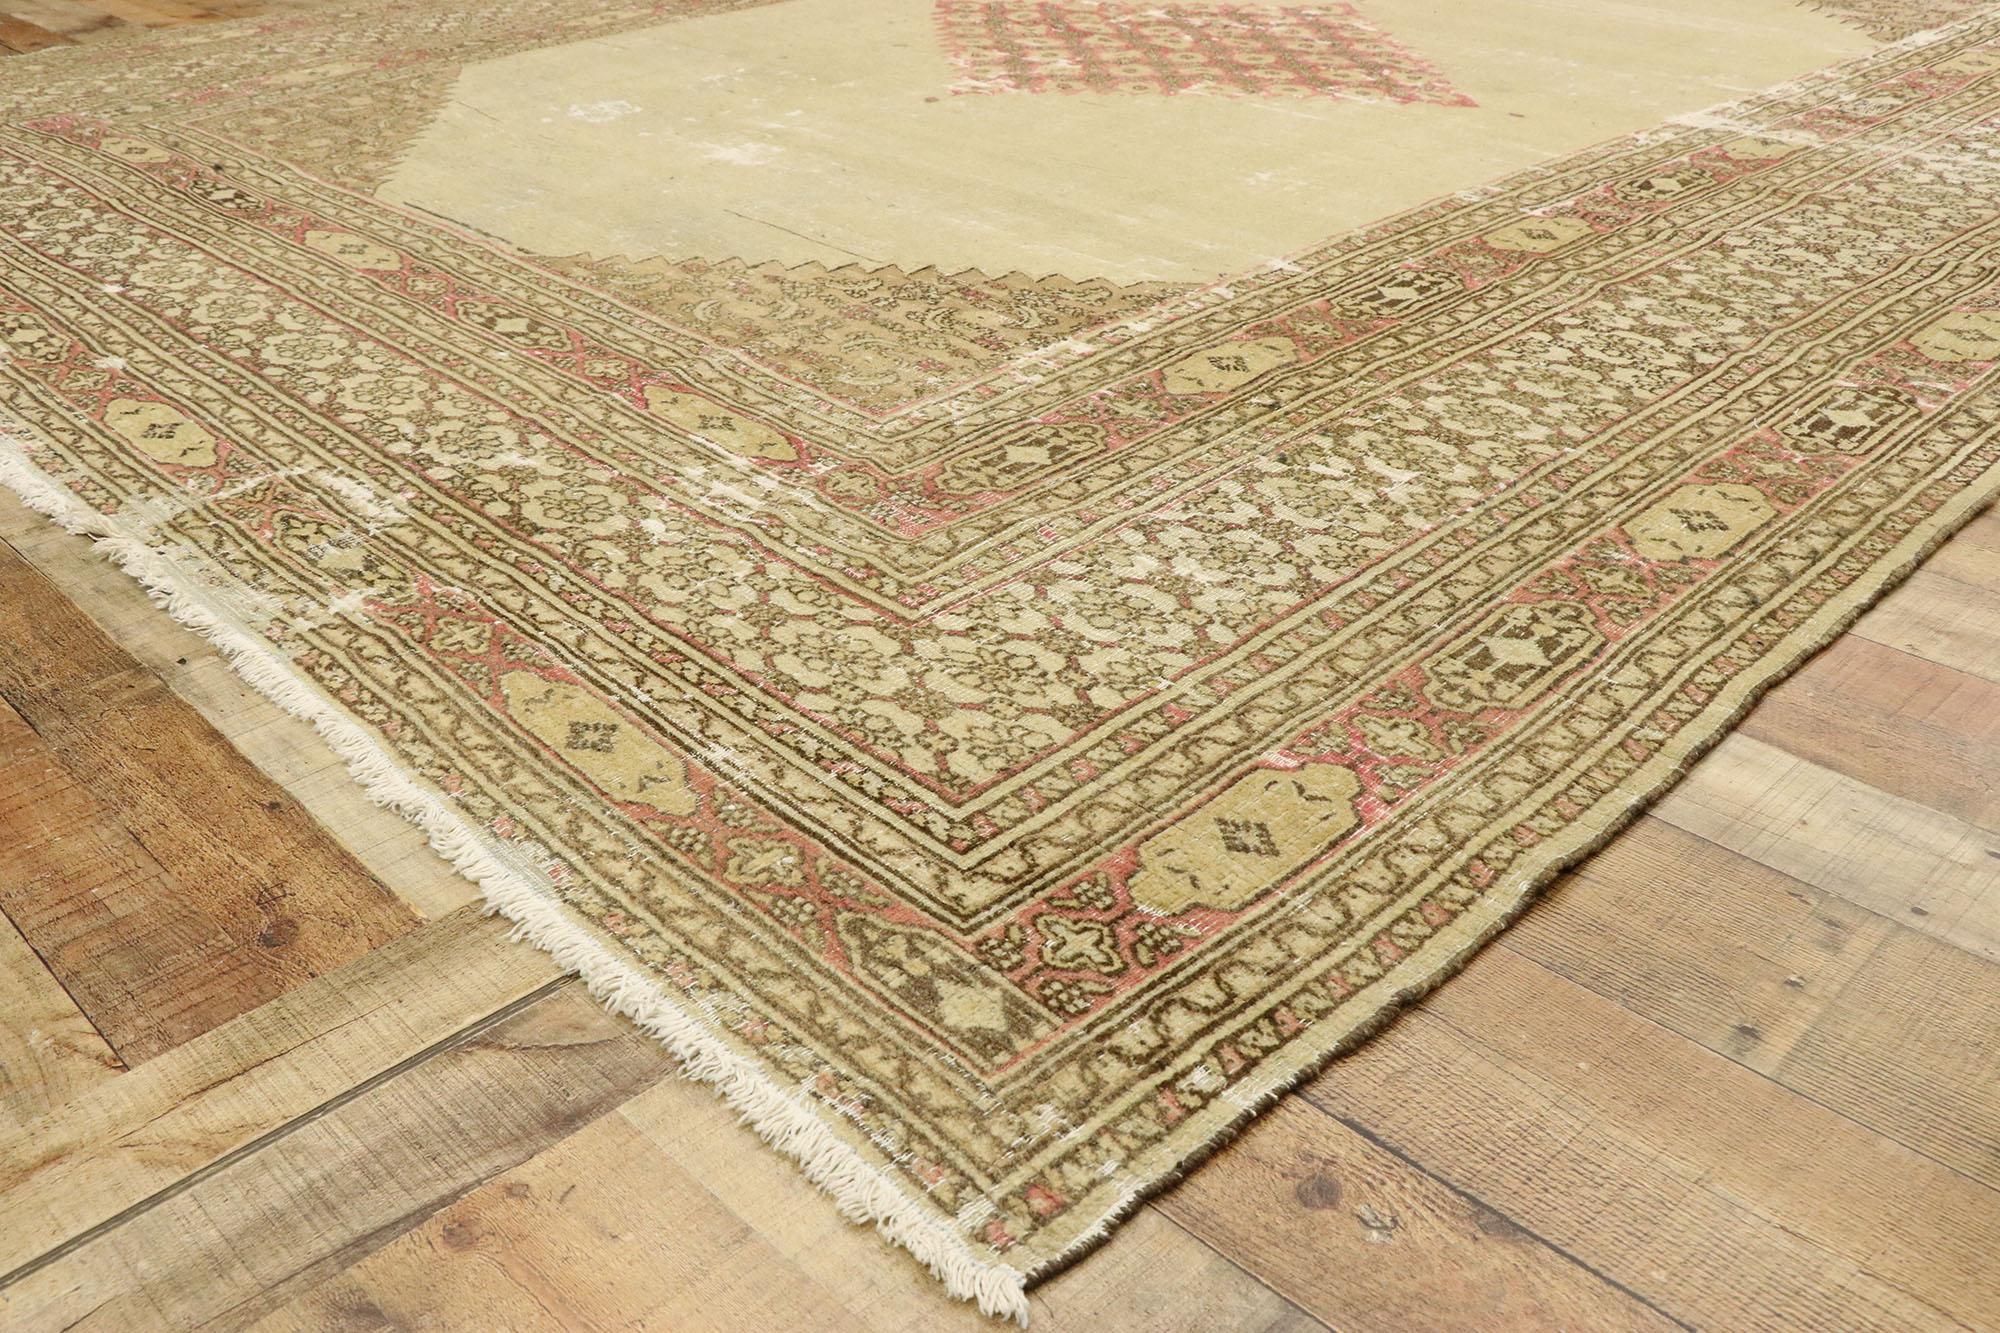 Late 19th Century Antique Persian Khorassan Rug with English Manor Style For Sale 6